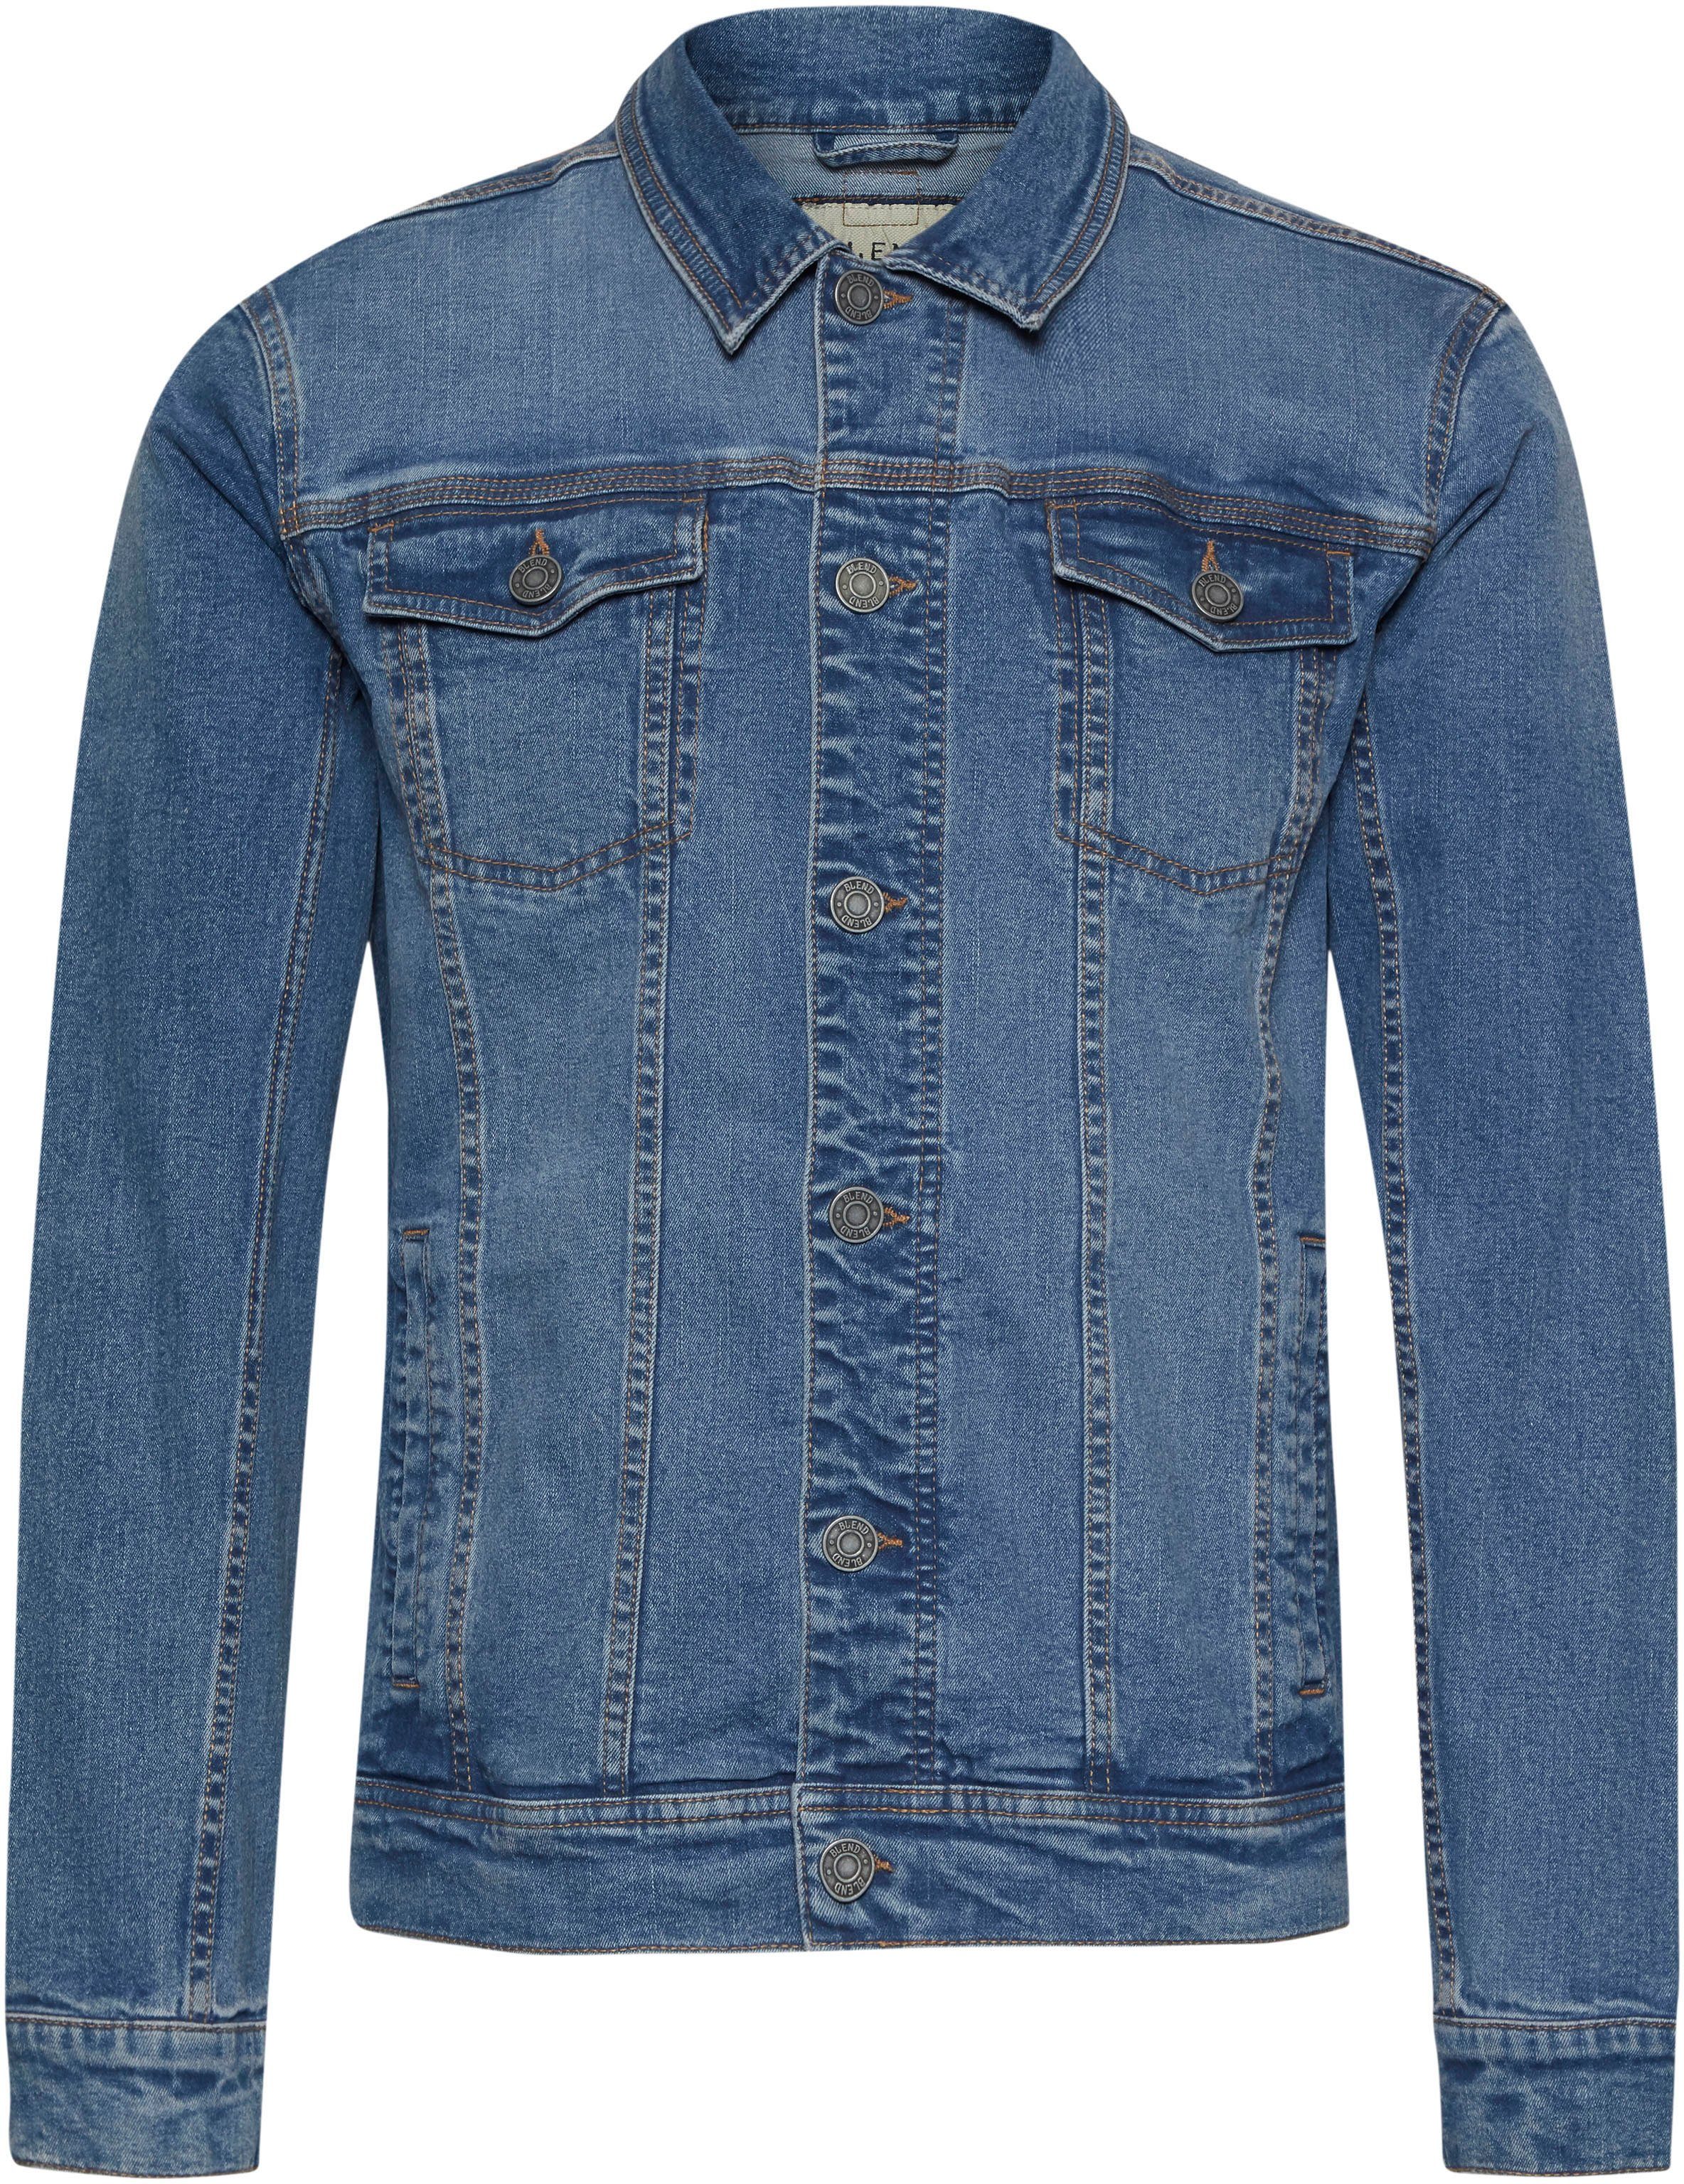 BHNARIL Blend washed Jeansjacke mid-blue